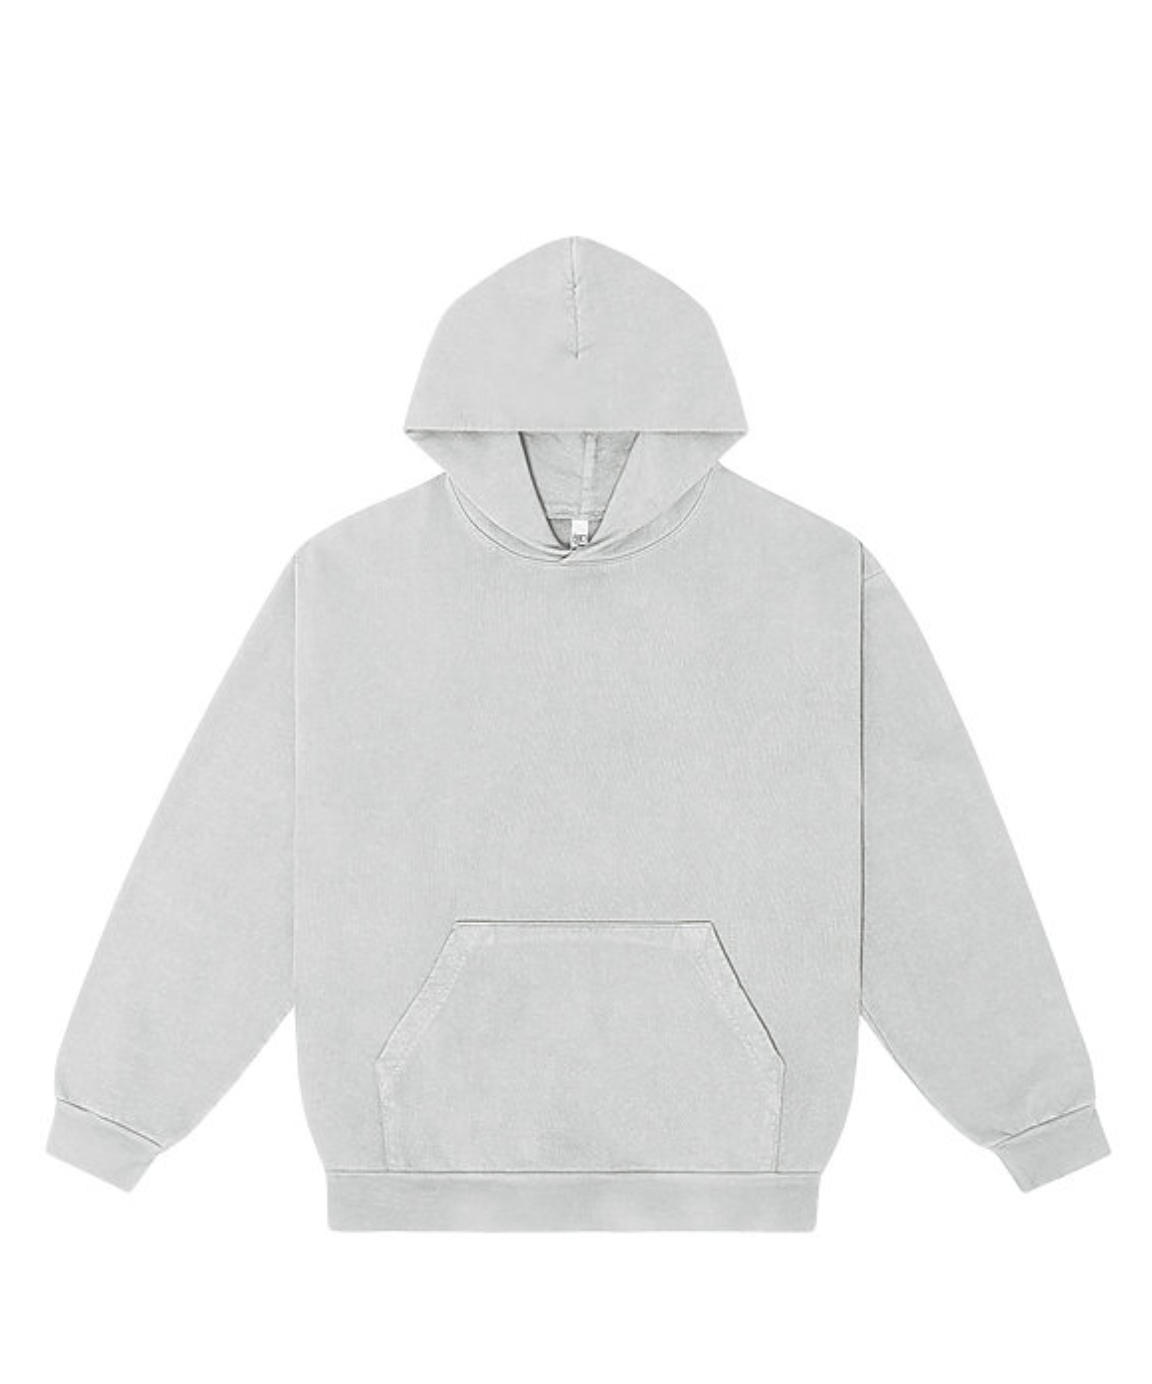 Rep (TV) White Hoodie -- Los Angeles Apparel -- (IN STOCK -- SHIPS IMMEDIATELY)